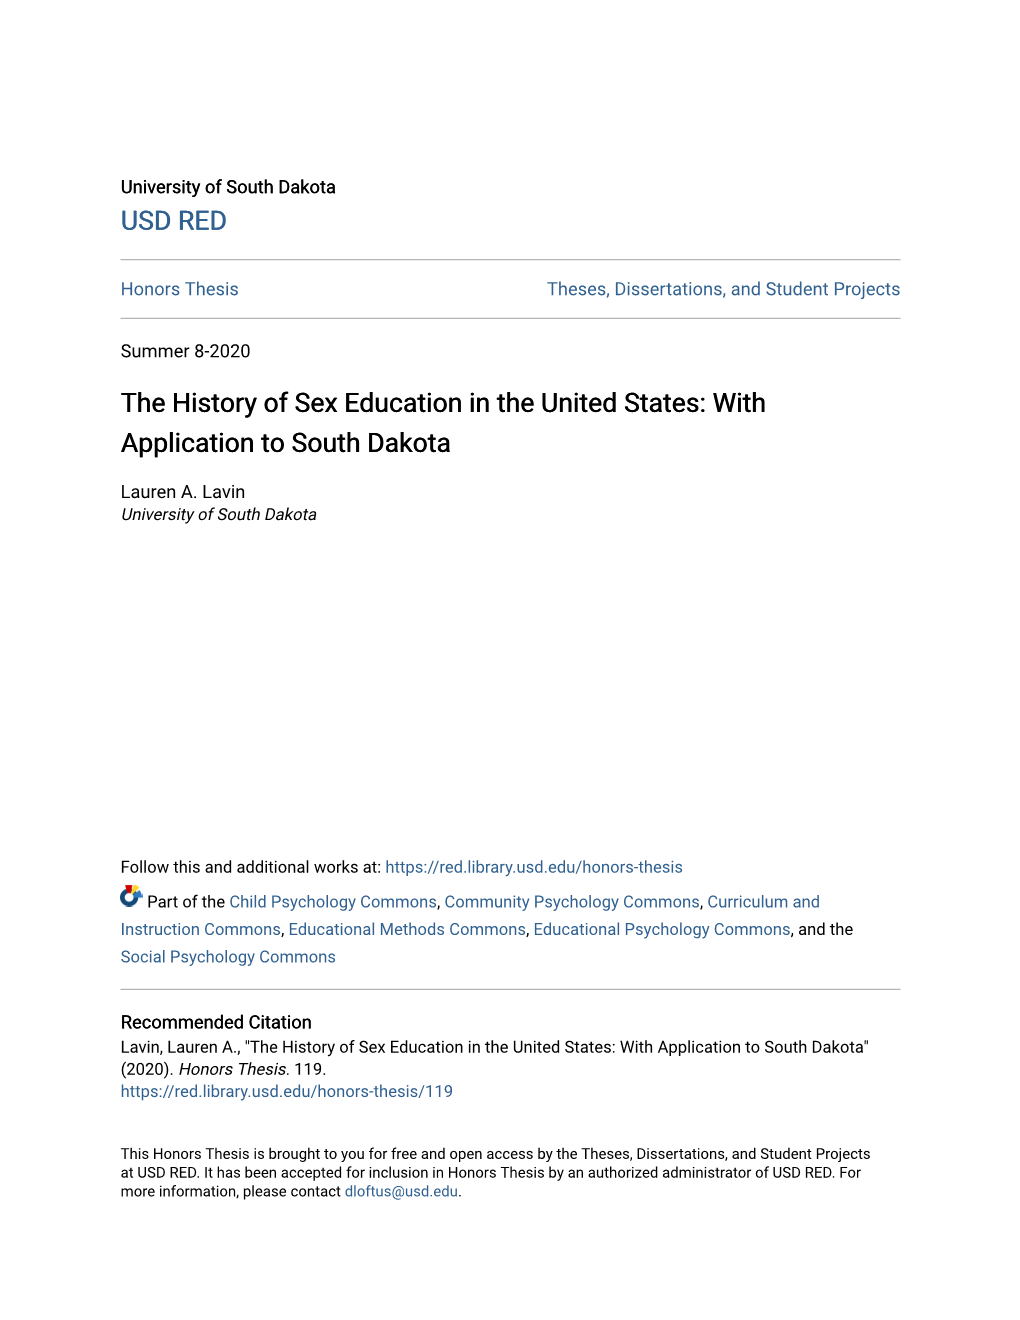 The History of Sex Education in the United States: with Application to South Dakota